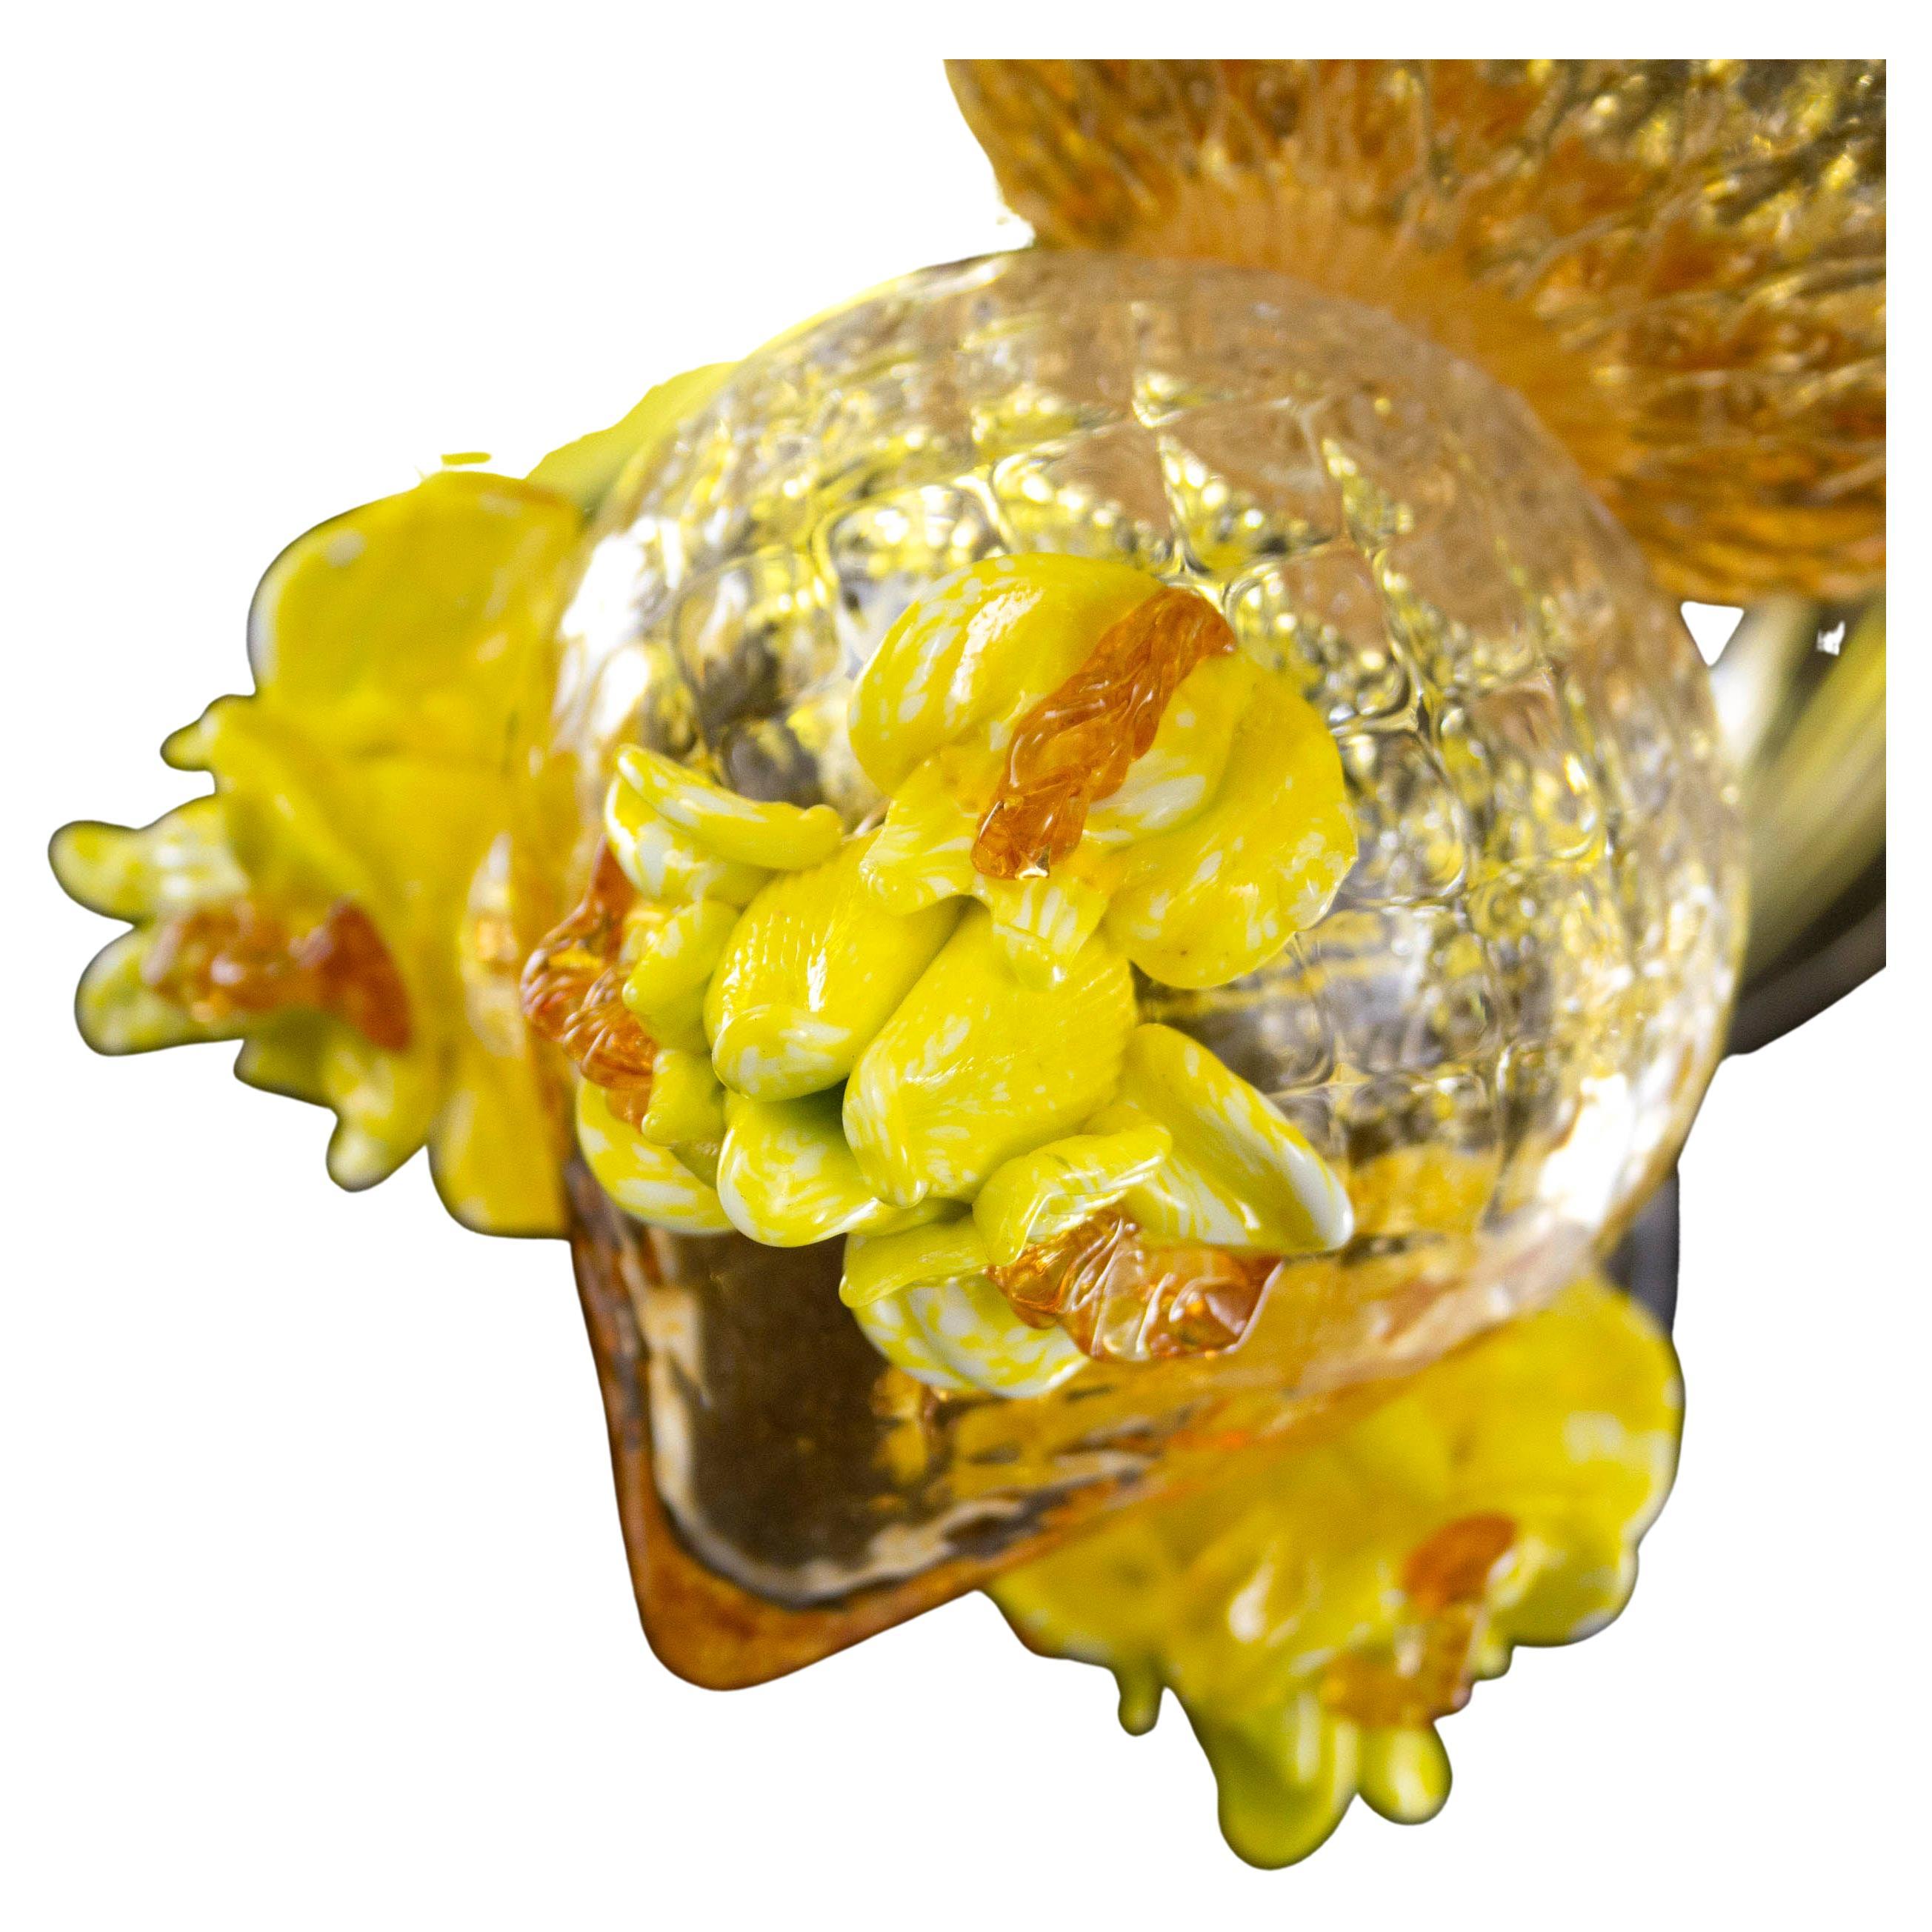 Artistic chandelier 8 arms clear, amber, yellow Murano glass with upper flowers and leaves Iris garden by Multiforme
Original and innovative artistic glass chandeliers Iris garden. A collection inspired from the flowers. Iris garden is a lighting